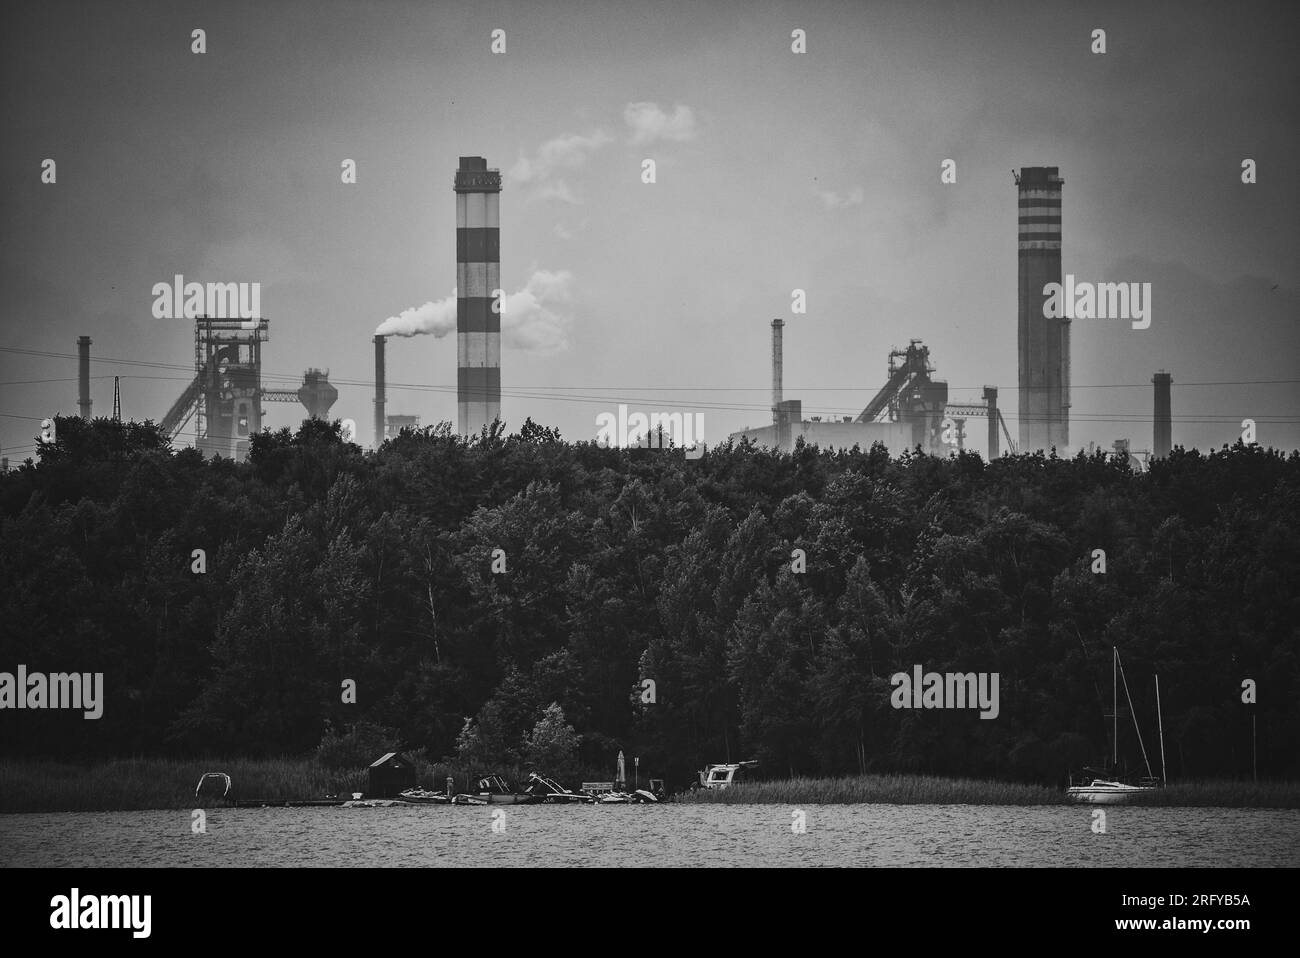 Industrial steel factory, iron works. Metallurgical plant. steelworks. Heavy industry in Europe. Air pollution from chimneys. Ironworks on a backgroun Stock Photo